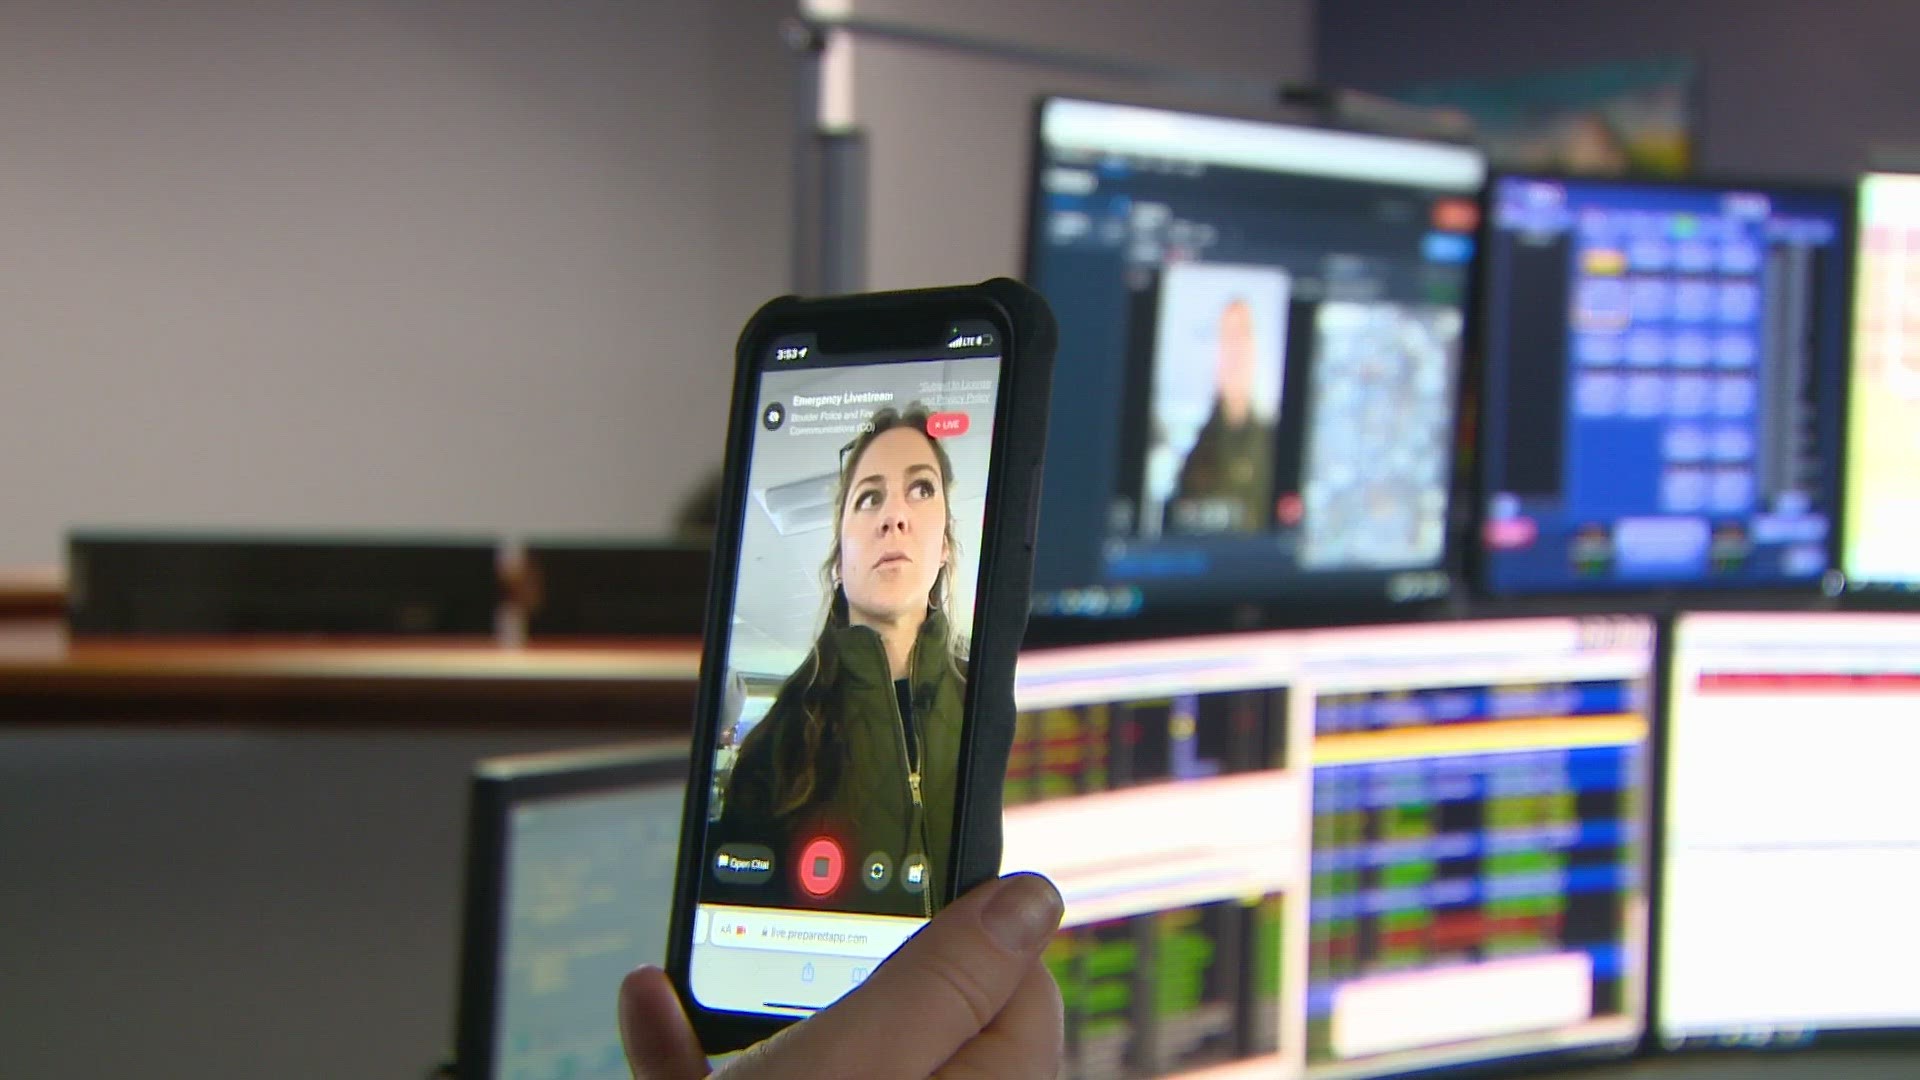 In Boulder, you can now livestream a 911 call – to share photos and videos -- in real-time with a dispatcher. The city launched the new technology this month.